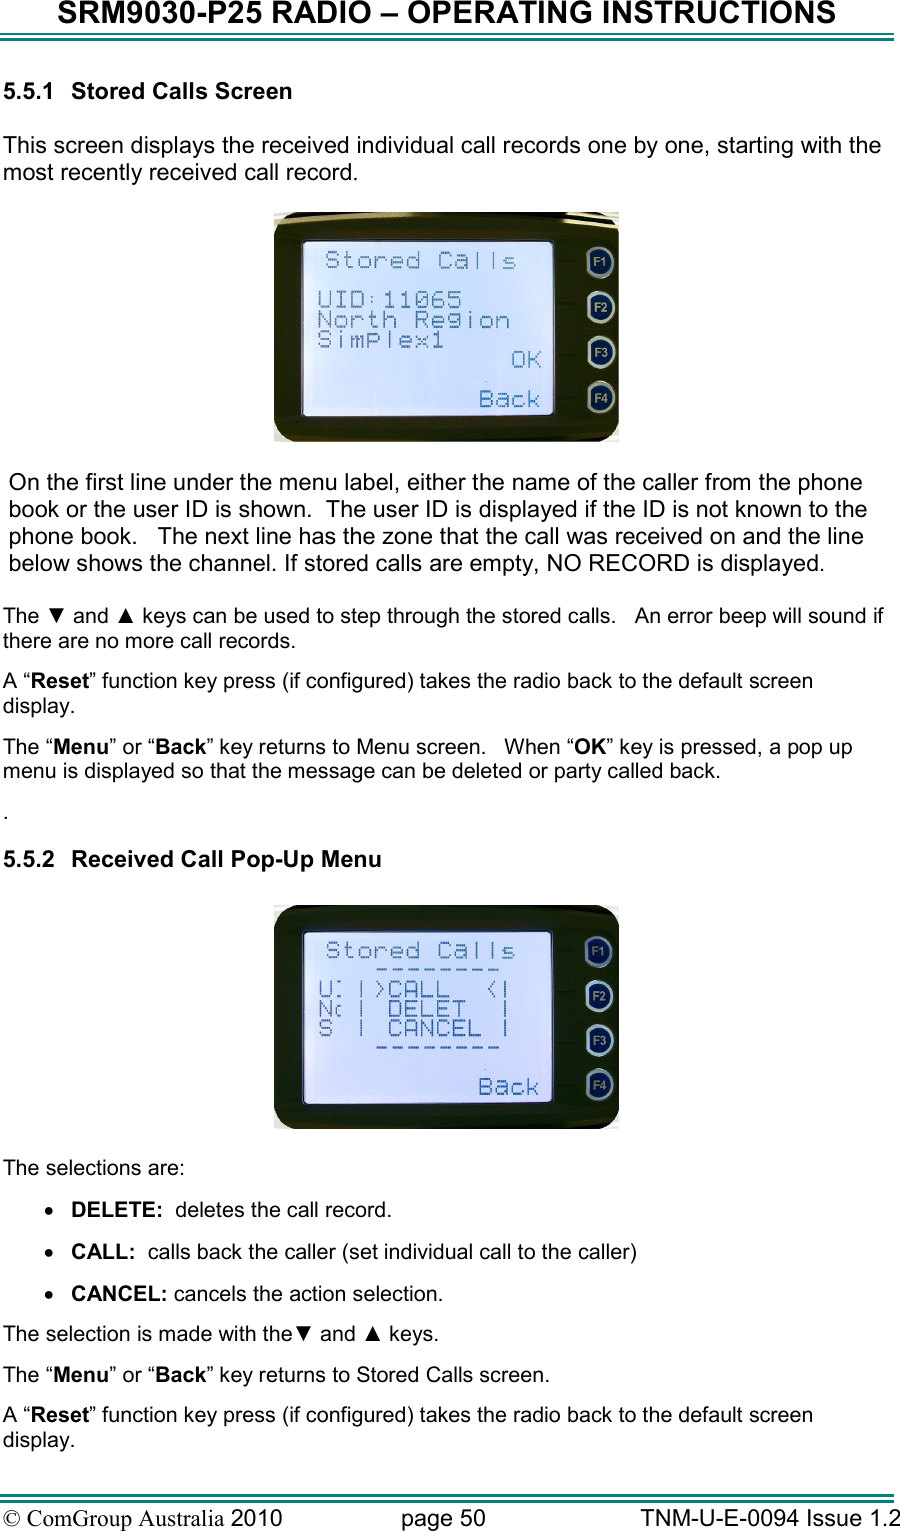 SRM9030-P25 RADIO – OPERATING INSTRUCTIONS © ComGroup Australia 2010  page 50   TNM-U-E-0094 Issue 1.2 5.5.1  Stored Calls Screen  This screen displays the received individual call records one by one, starting with the most recently received call record.    On the first line under the menu label, either the name of the caller from the phone book or the user ID is shown.  The user ID is displayed if the ID is not known to the phone book.   The next line has the zone that the call was received on and the line below shows the channel. If stored calls are empty, NO RECORD is displayed.  The ▼ and ▲ keys can be used to step through the stored calls.   An error beep will sound if there are no more call records.  A “Reset” function key press (if configured) takes the radio back to the default screen display. The “Menu” or “Back” key returns to Menu screen.   When “OK” key is pressed, a pop up menu is displayed so that the message can be deleted or party called back. . 5.5.2  Received Call Pop-Up Menu    The selections are: • DELETE:  deletes the call record. • CALL:  calls back the caller (set individual call to the caller) • CANCEL: cancels the action selection. The selection is made with the▼ and ▲ keys. The “Menu” or “Back” key returns to Stored Calls screen. A “Reset” function key press (if configured) takes the radio back to the default screen display. 